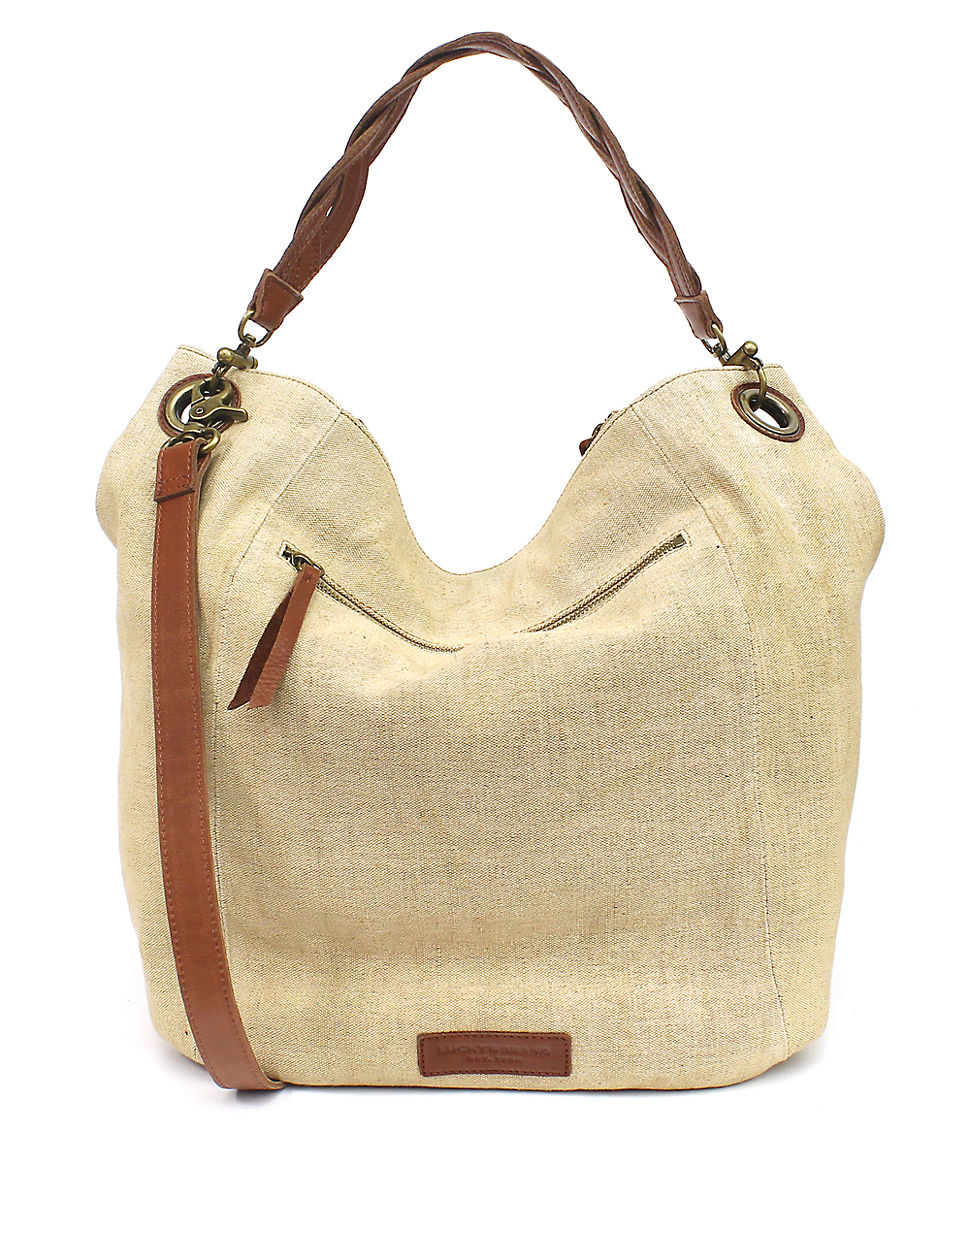 Lucky Brand Ashmore Small Canvas Hobo Bag in Sand (Brown) - Lyst